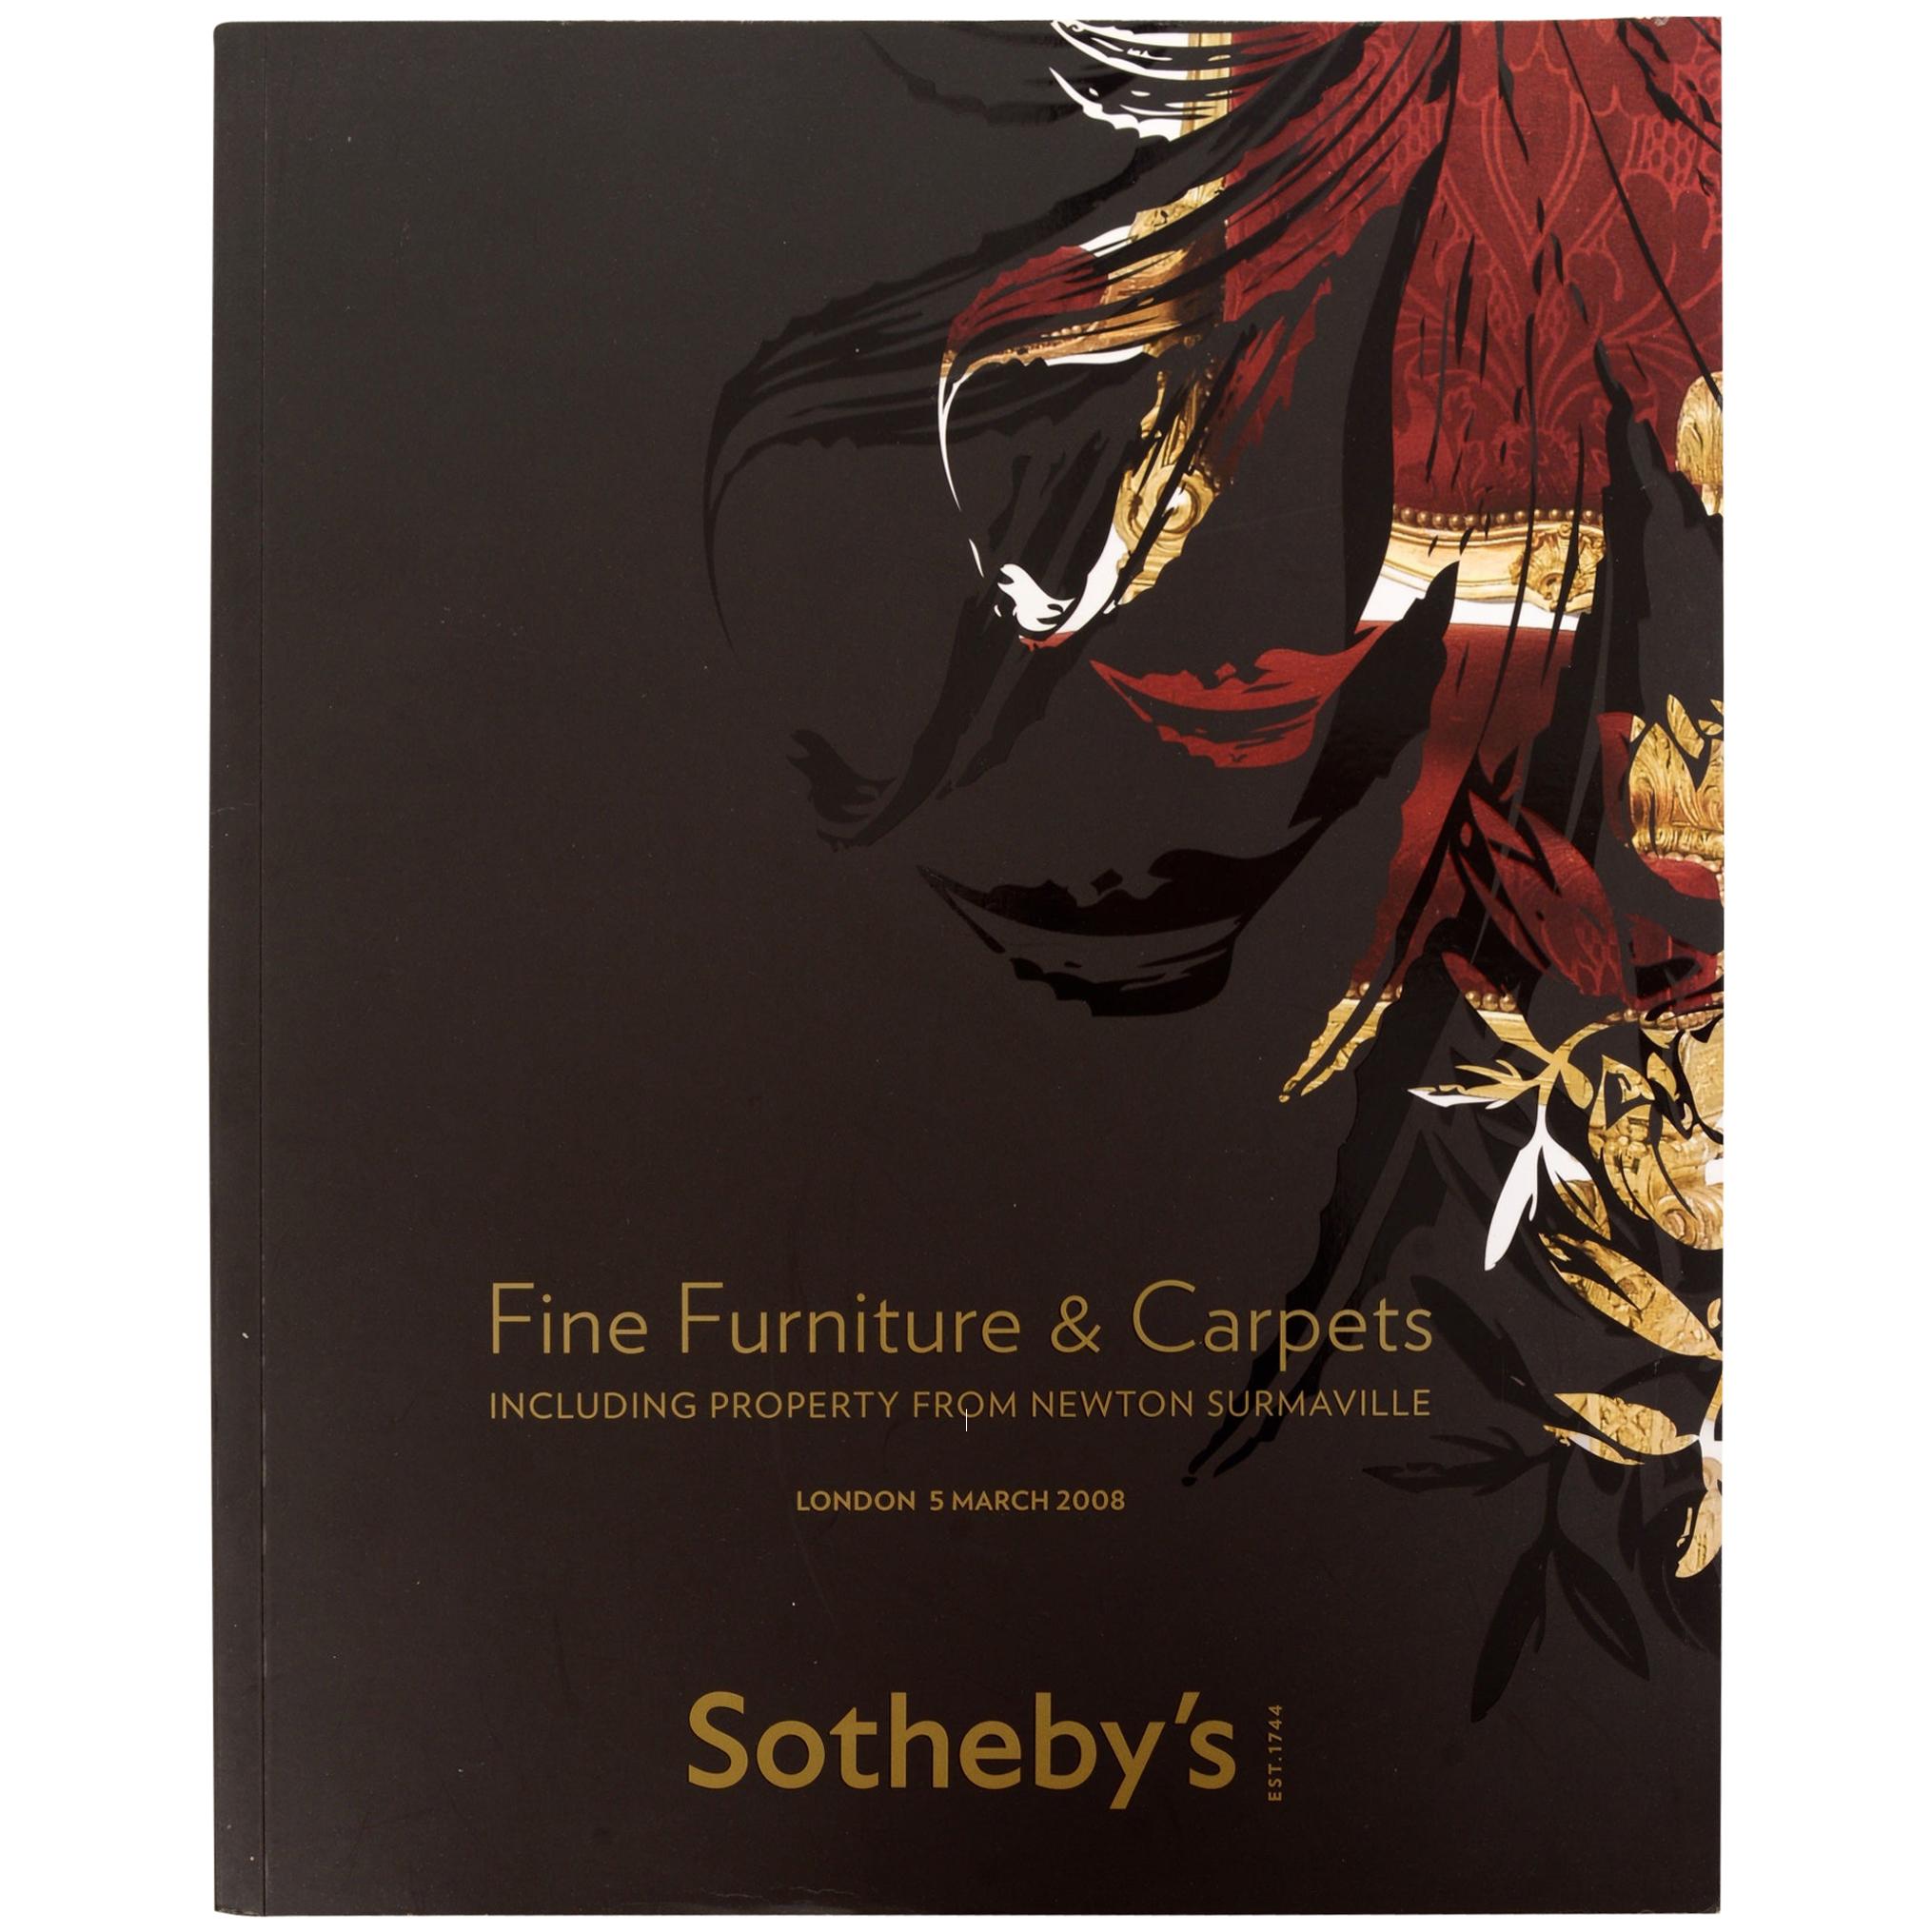 Sotheby's Fine Furniture and Carpets Including Property from Newton Surmaville